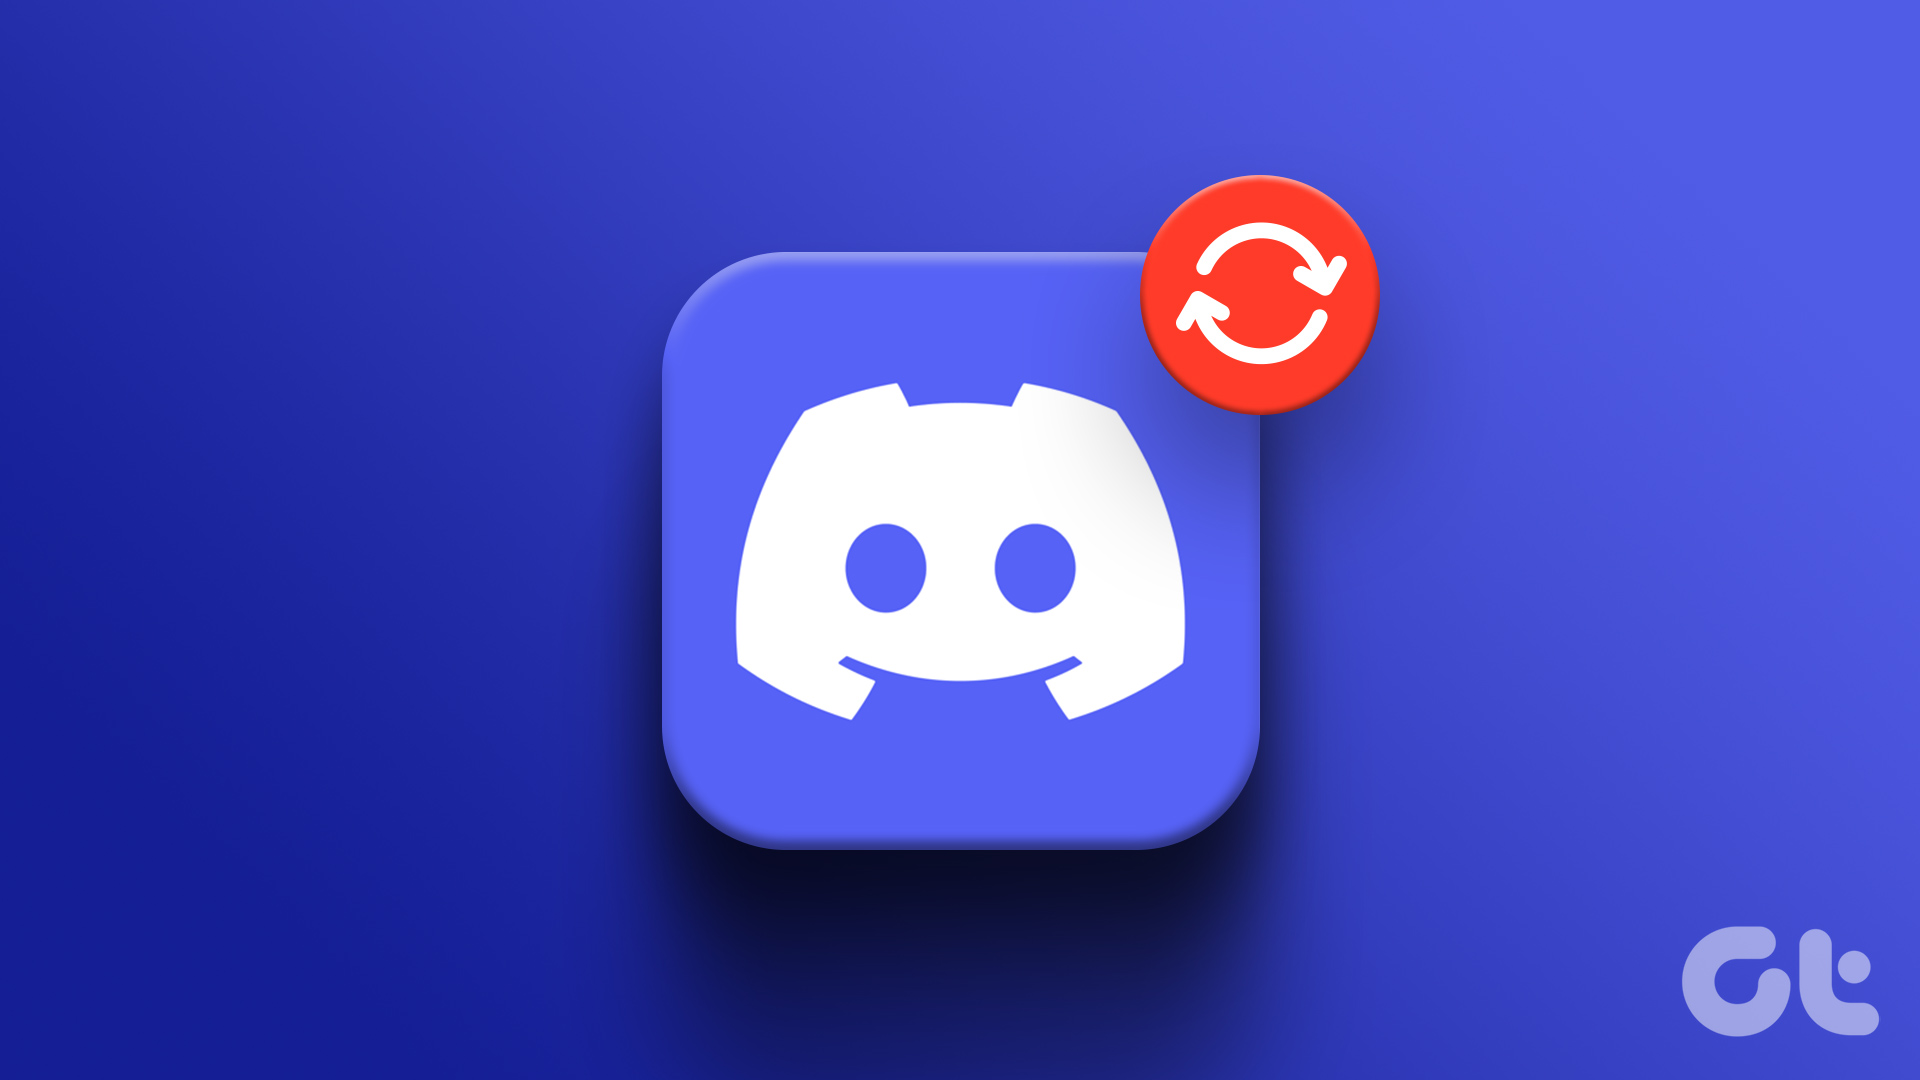 How to restart discord